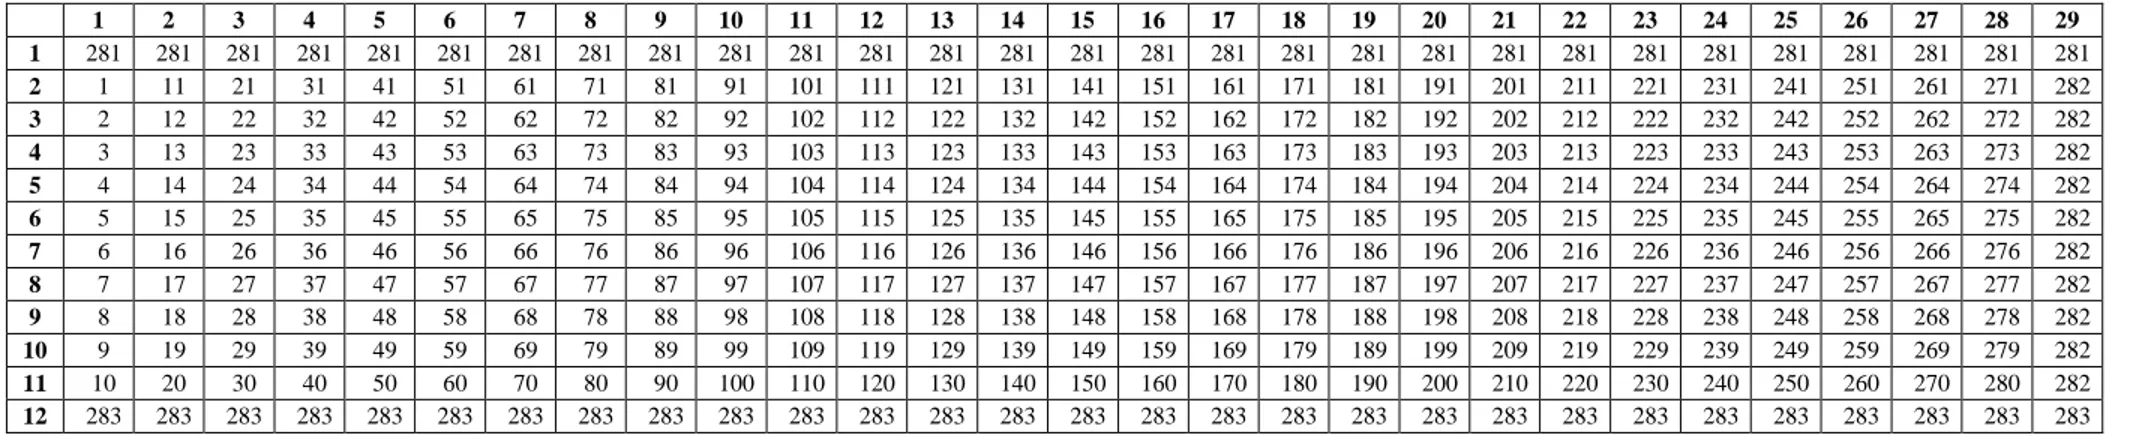 Table 4.3.2.1 – Compositions number in axial layers for each assembly type  1  2  3  4  5  6  7  8  9  10  11  12  13  14  15  16  17  18  19  20  21  22  23  24  25  26  27  28  29  1  281  281  281  281  281  281  281  281  281  281  281  281  281  281  